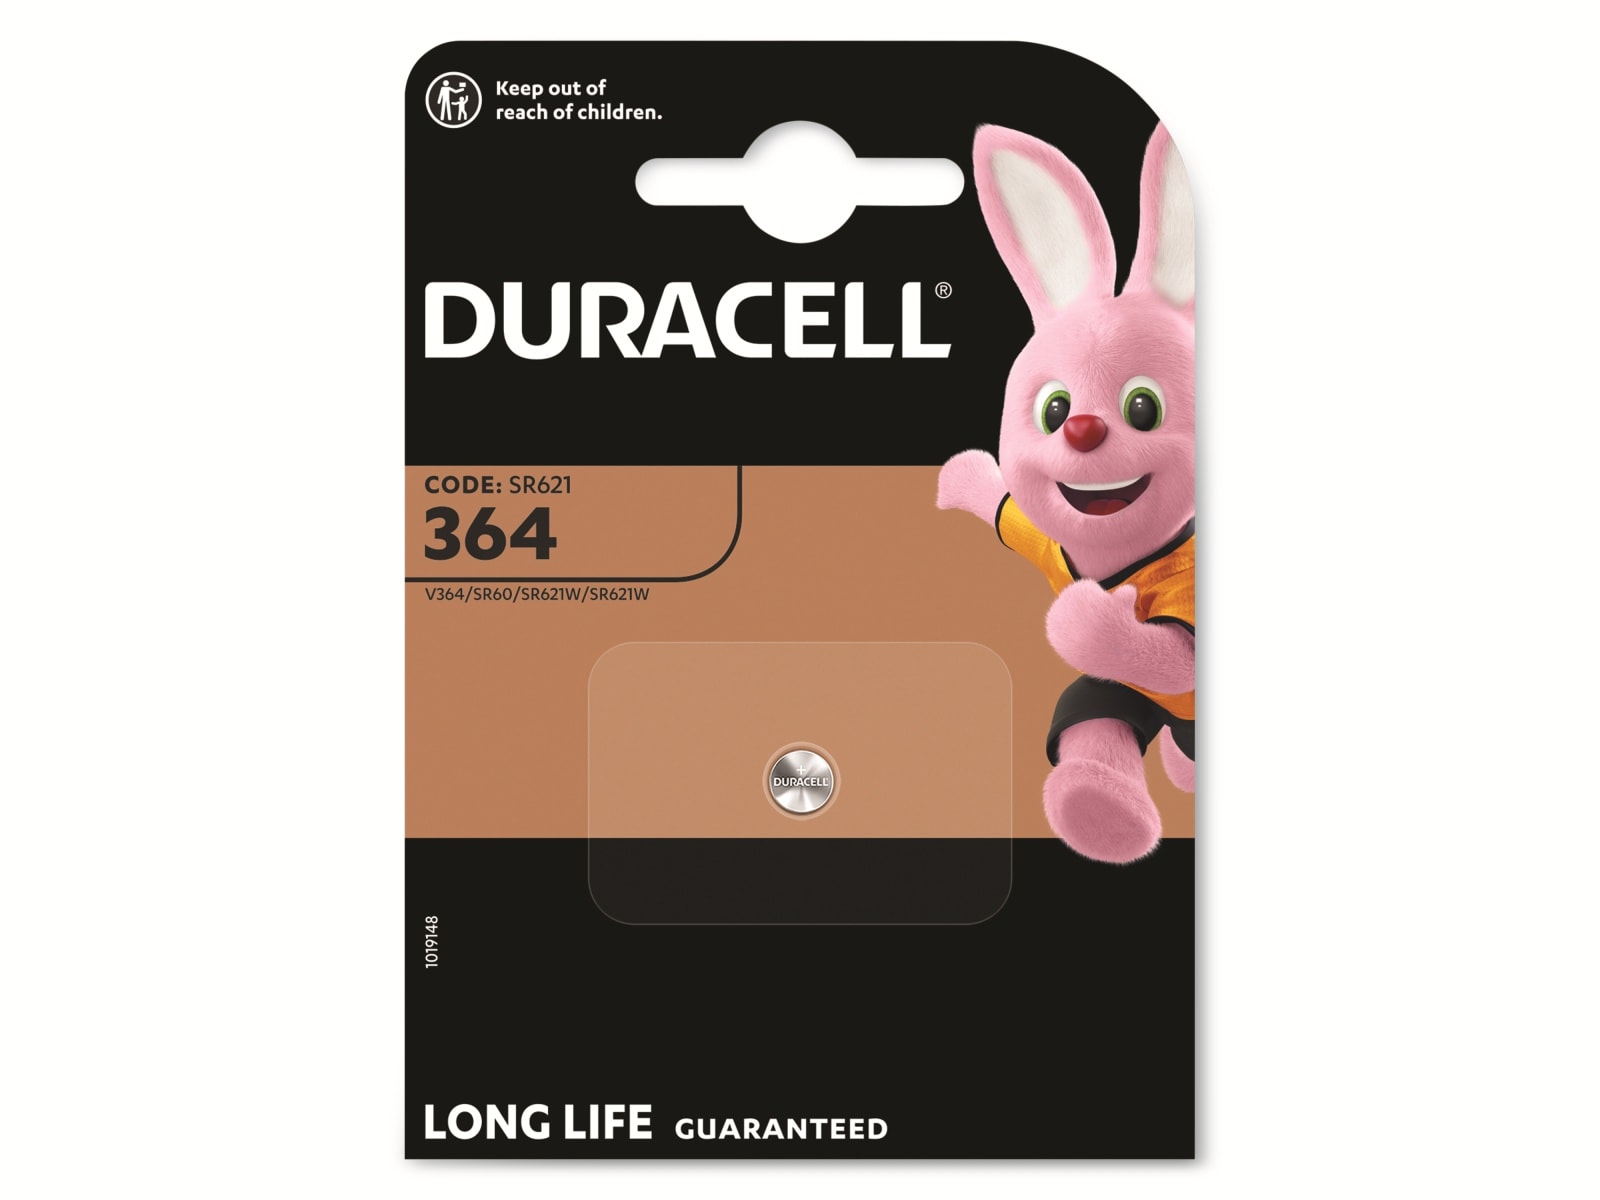 DURACELL Silver Oxide-Knopfzelle SR60, 1.5V, Watch